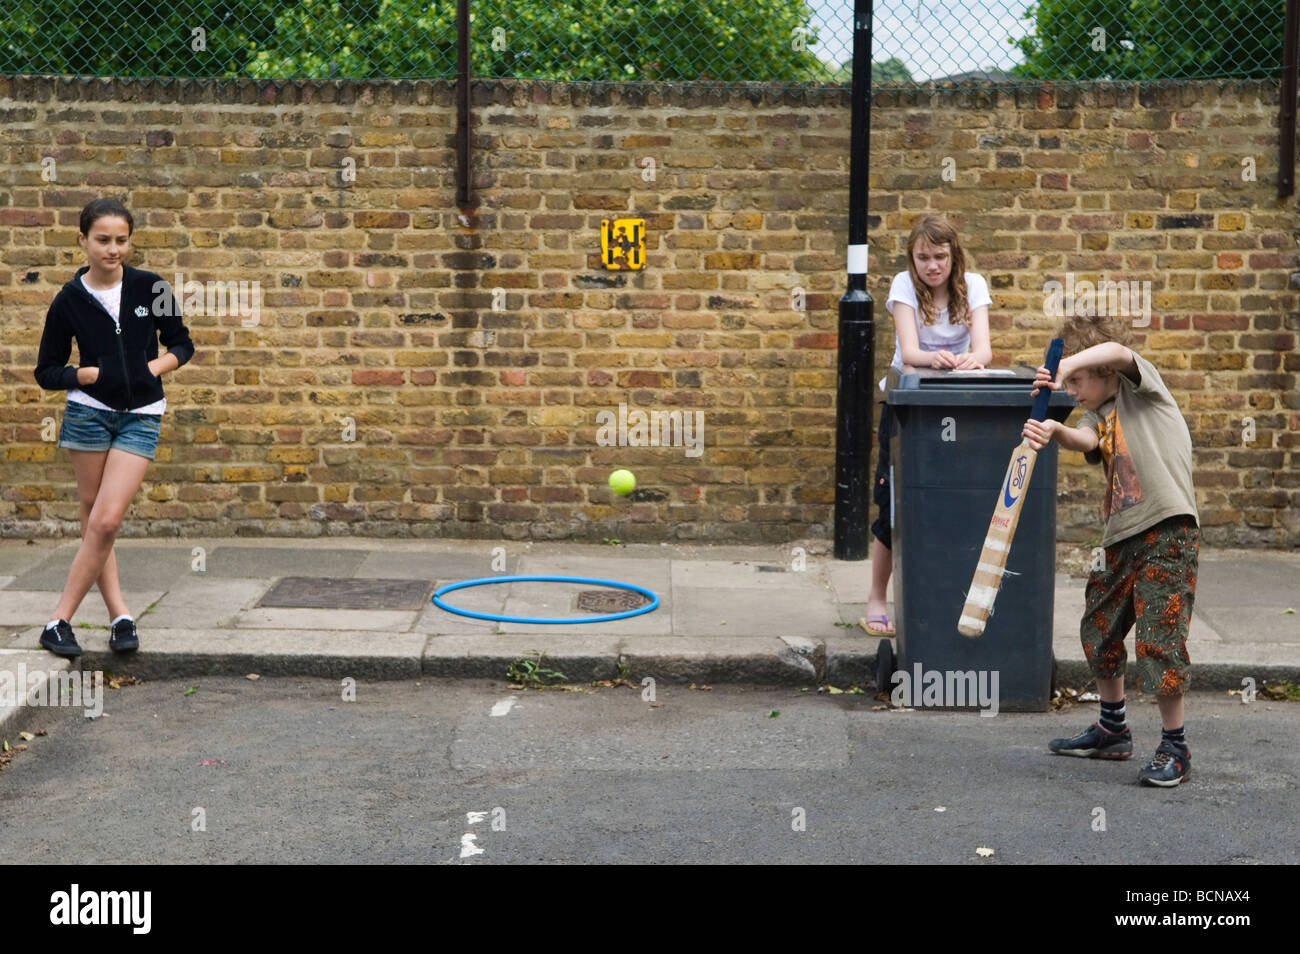 Children playing cricket in street boy girls. Brunswick Street Walthamstow London E17 Using the dustbin at the wicket. 2009 2000s England HOMER SYKES Stock Photo